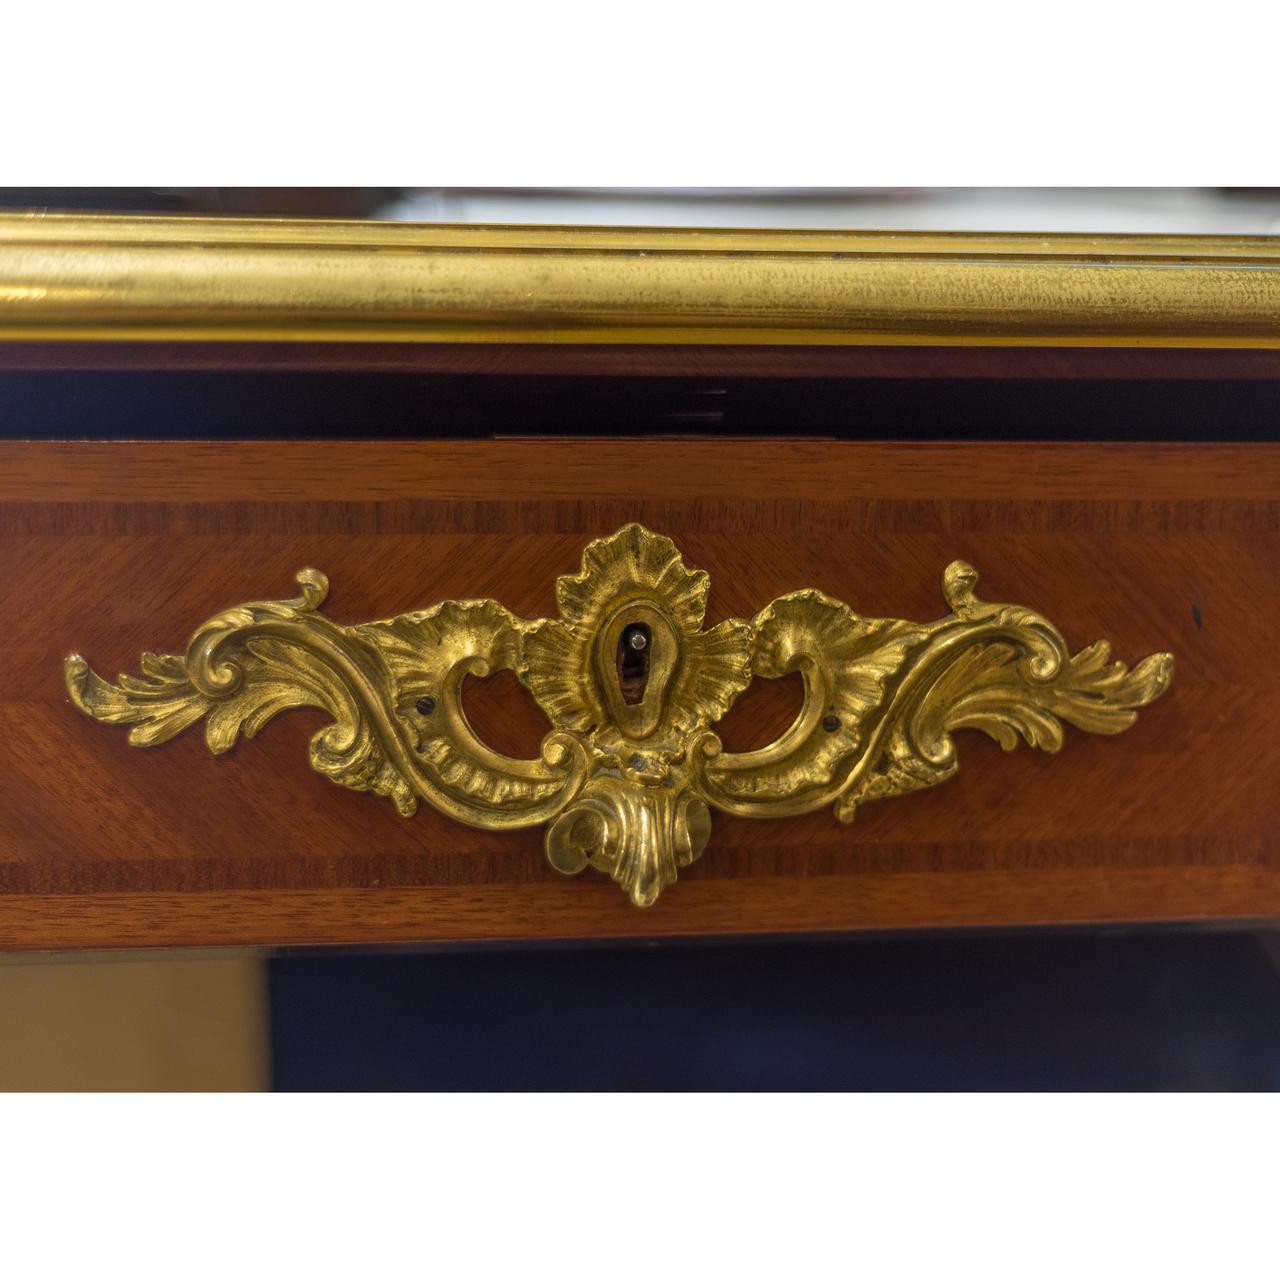 French 19th Century Louis XV Style Ormolu-Mounted Bureau Plat by Maison Krieger For Sale